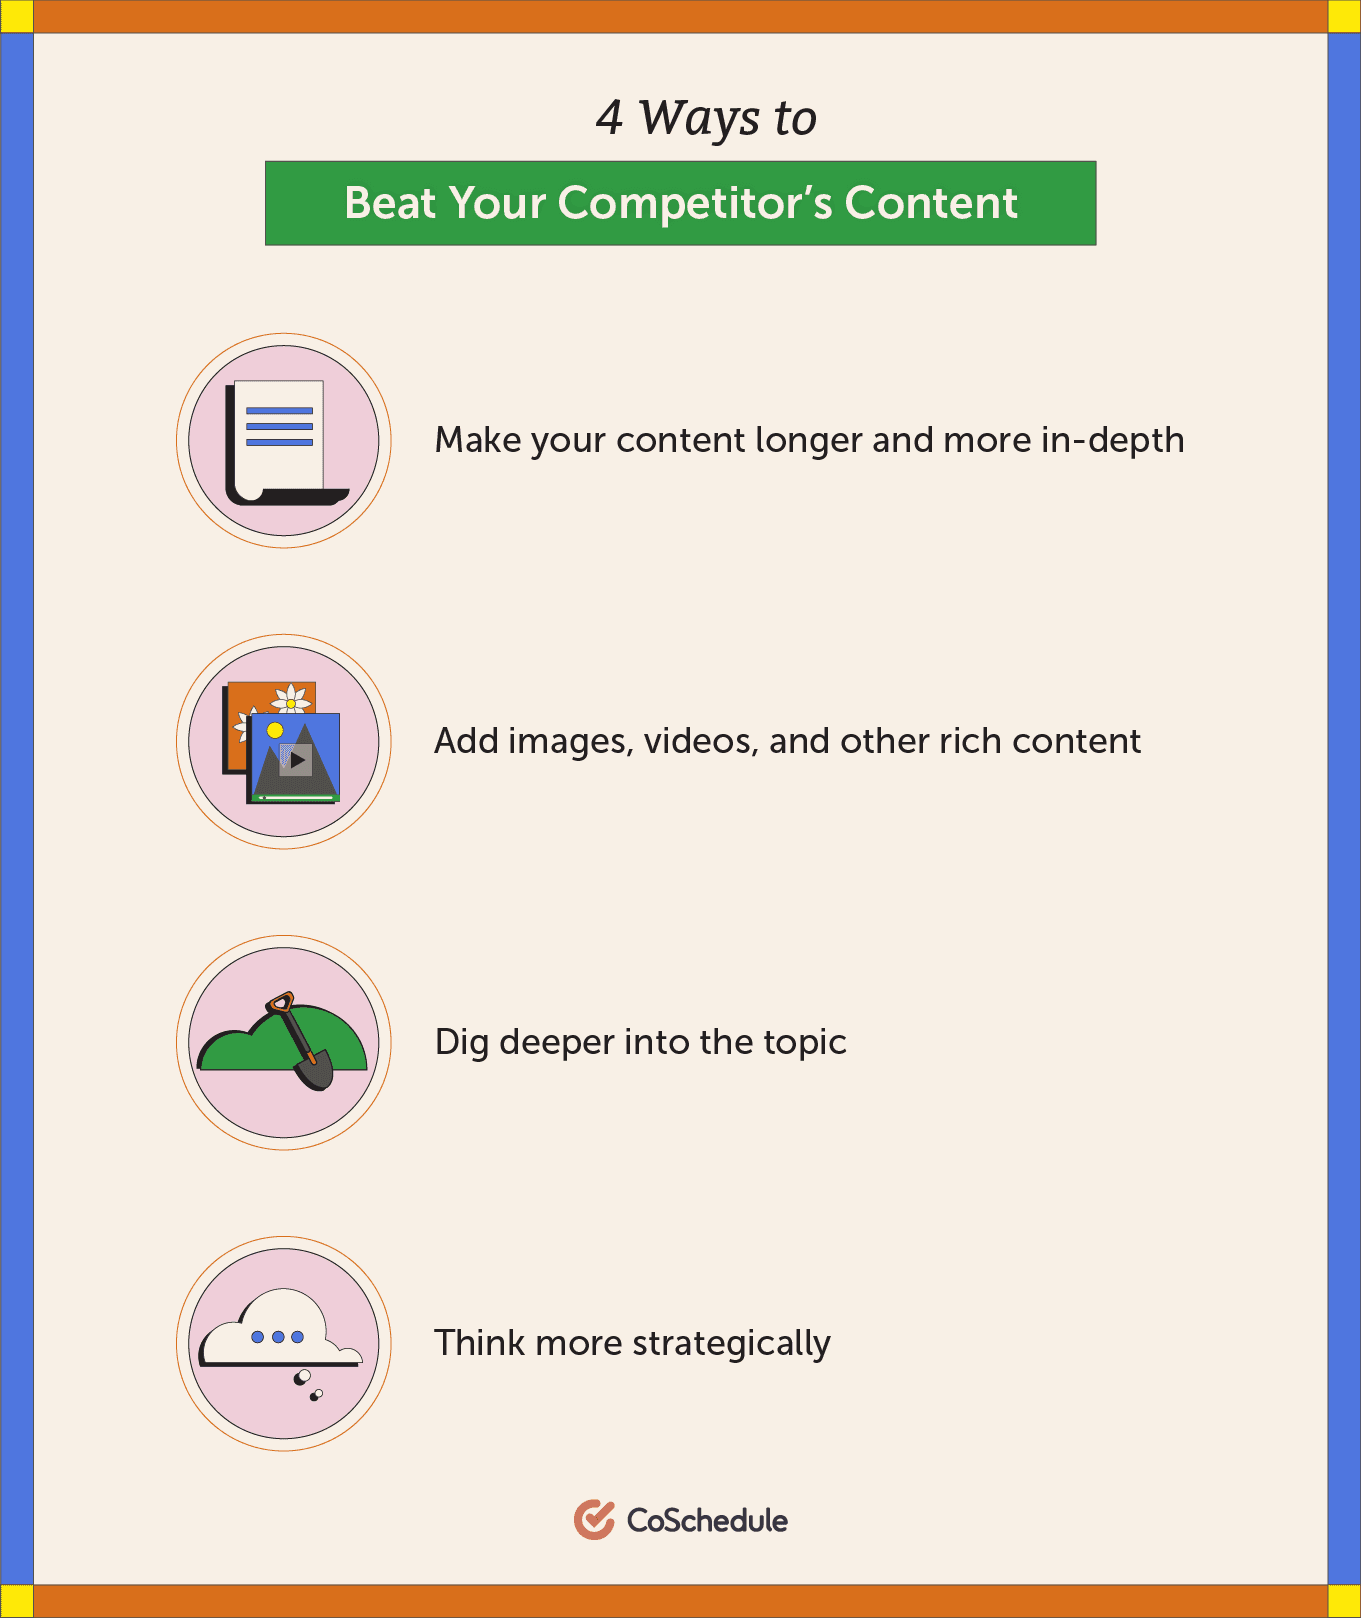 4 ways to compete with your competitor's content